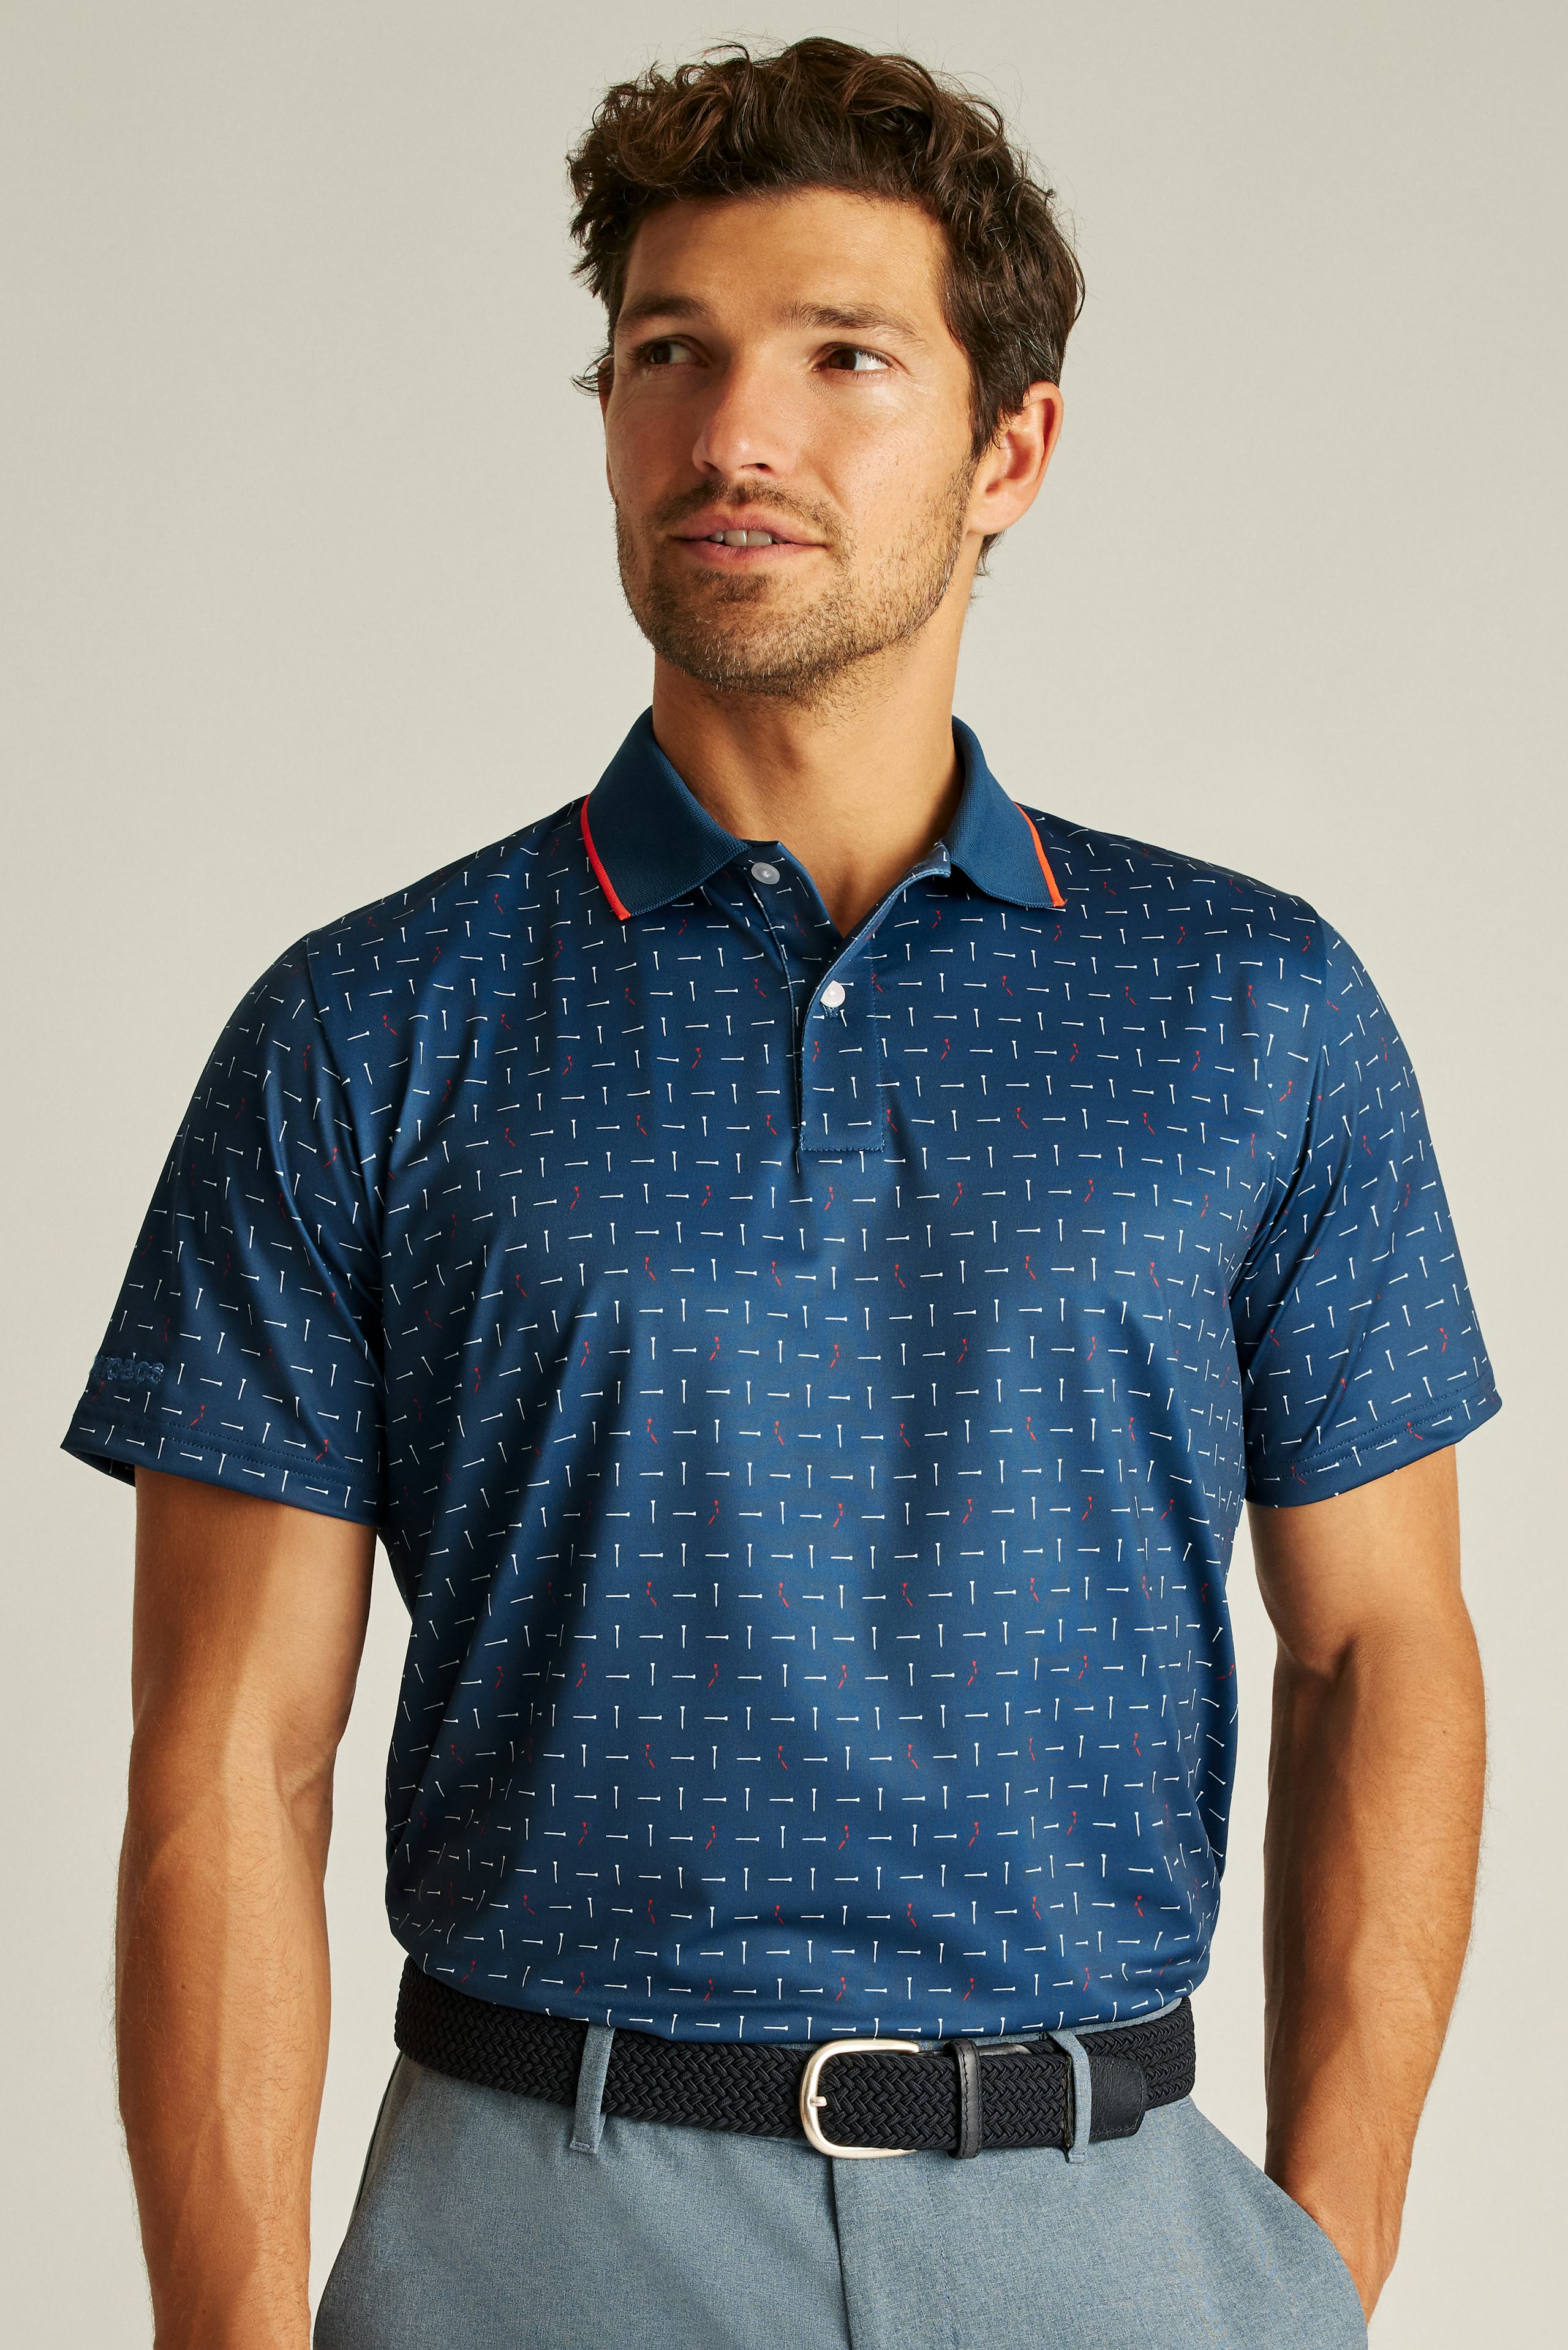 The Limited Edition Performance Golf Polo